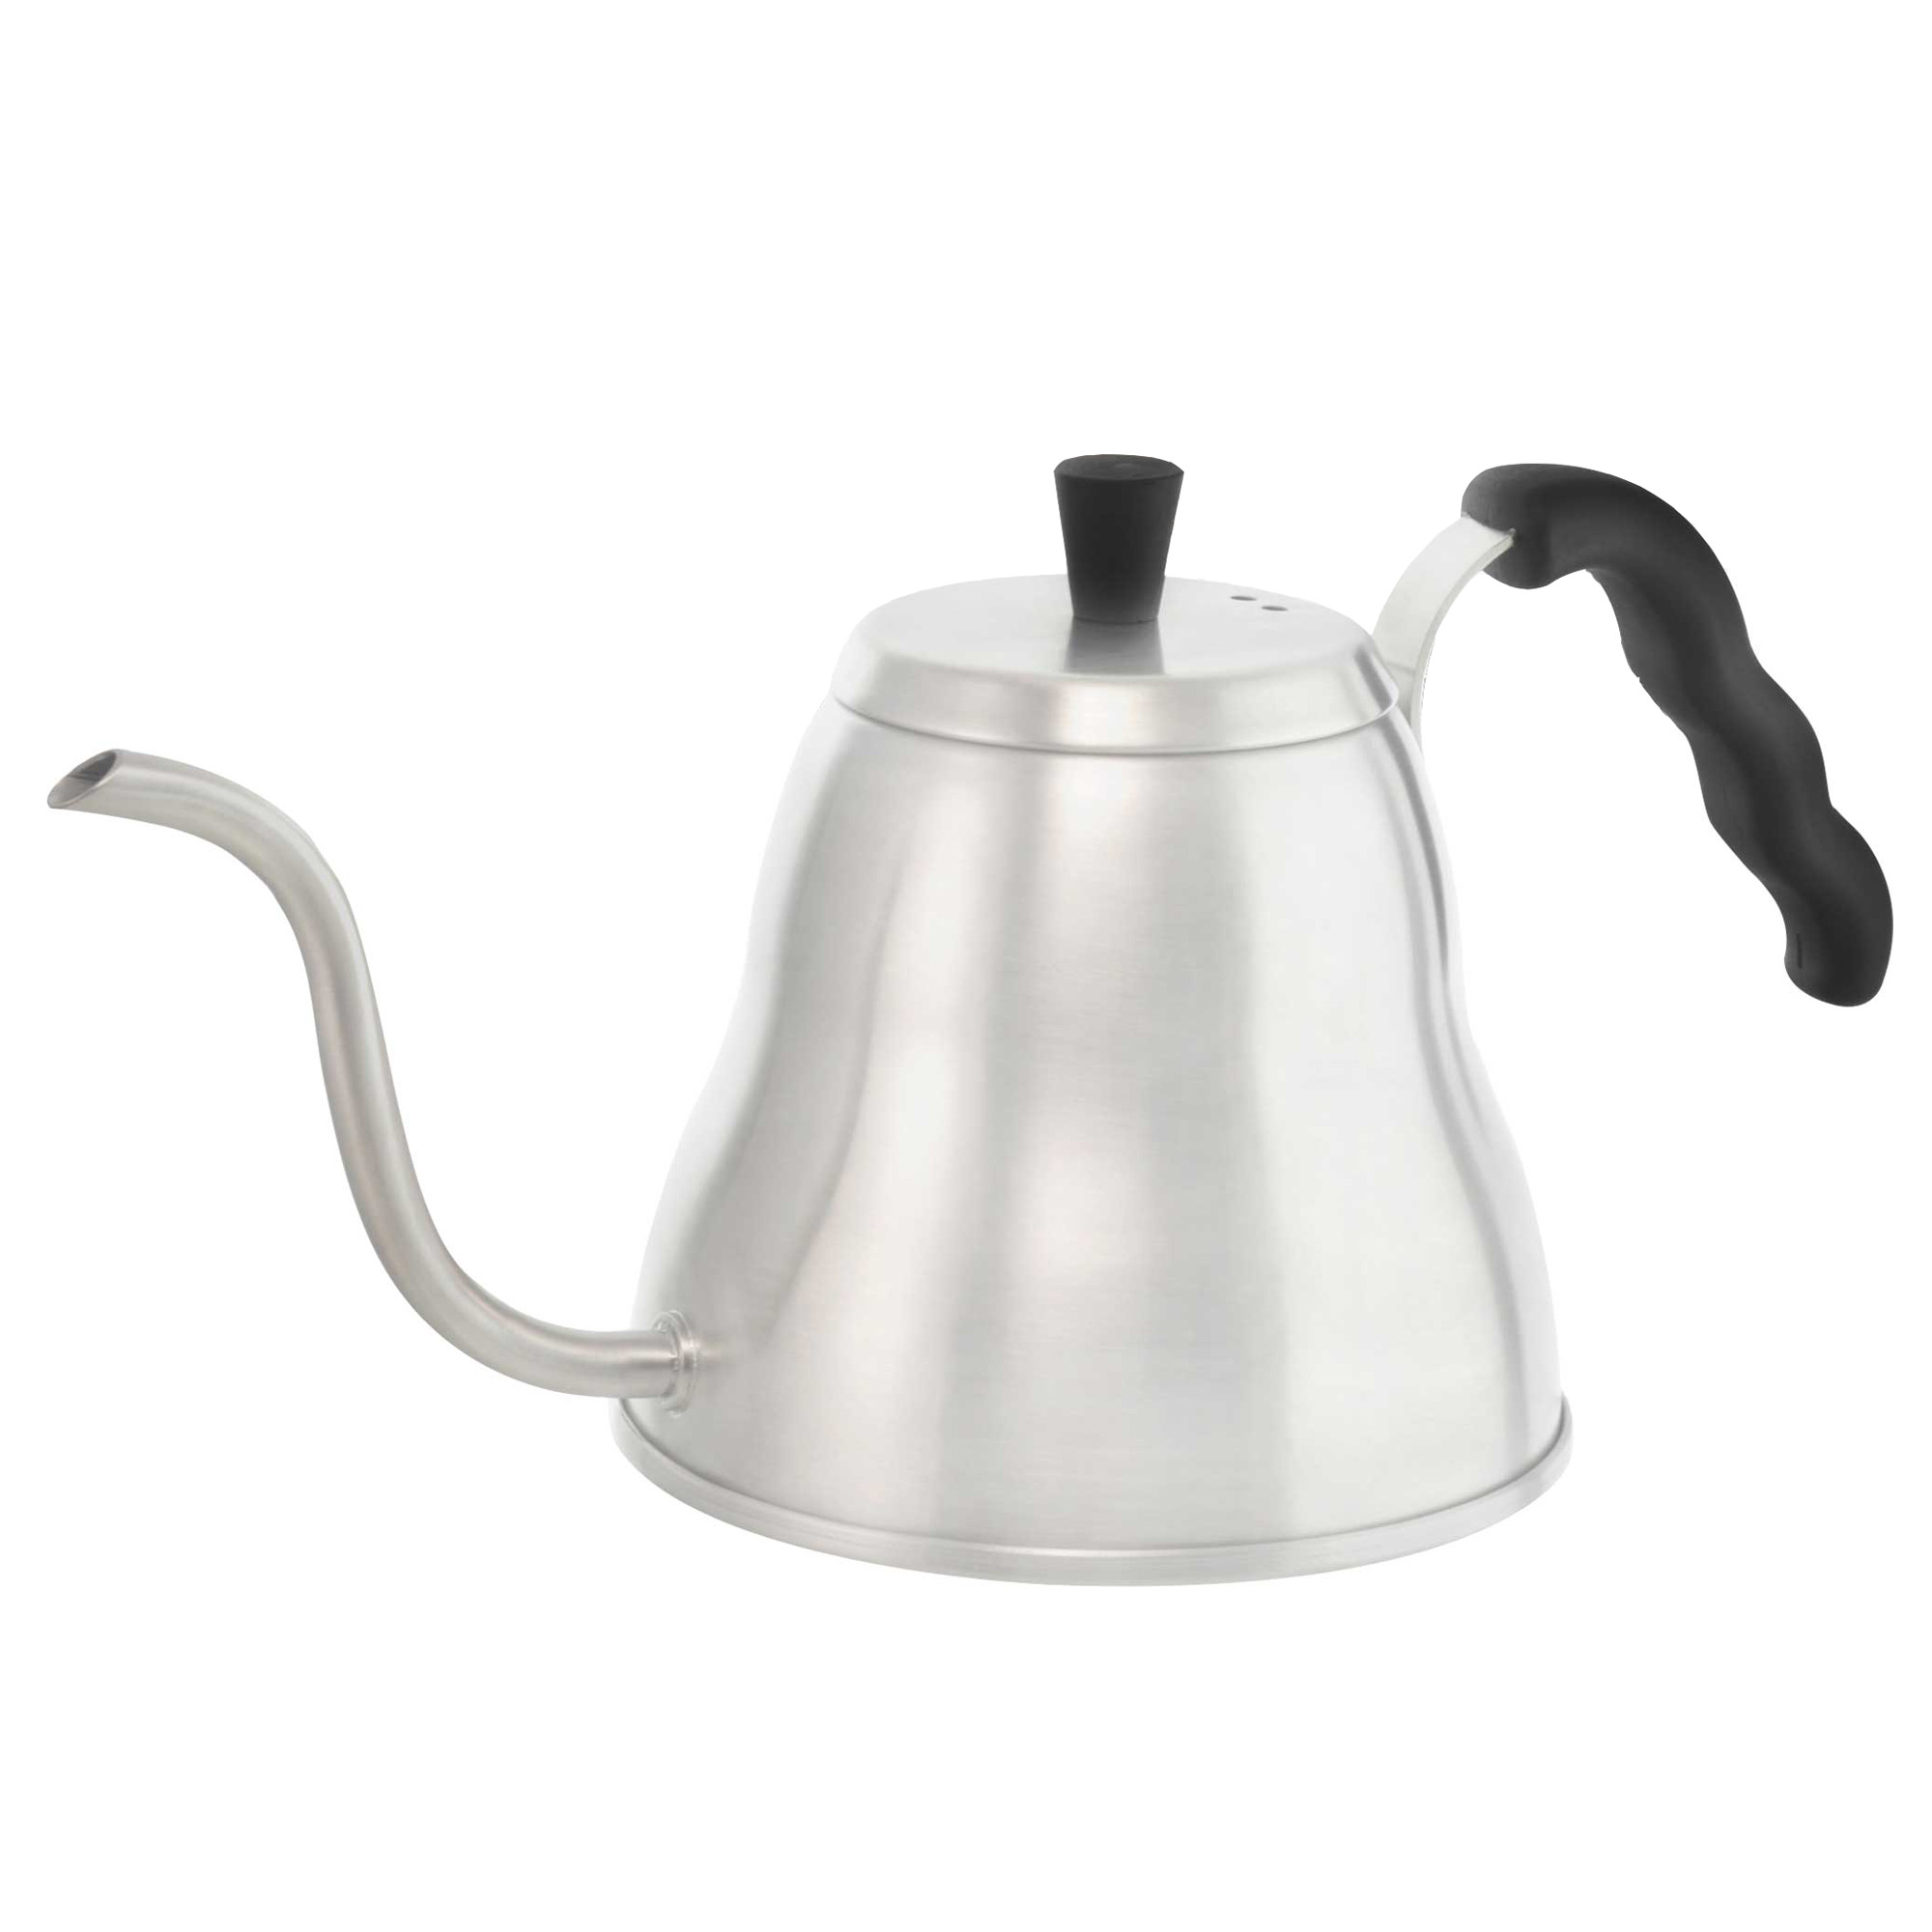 Coffee Dripper: GROSCHE Seattle Pour Over Coffee Maker - Grey Sleeve,  permanent Stainless Steel filter, 600ml/20 fl. oz